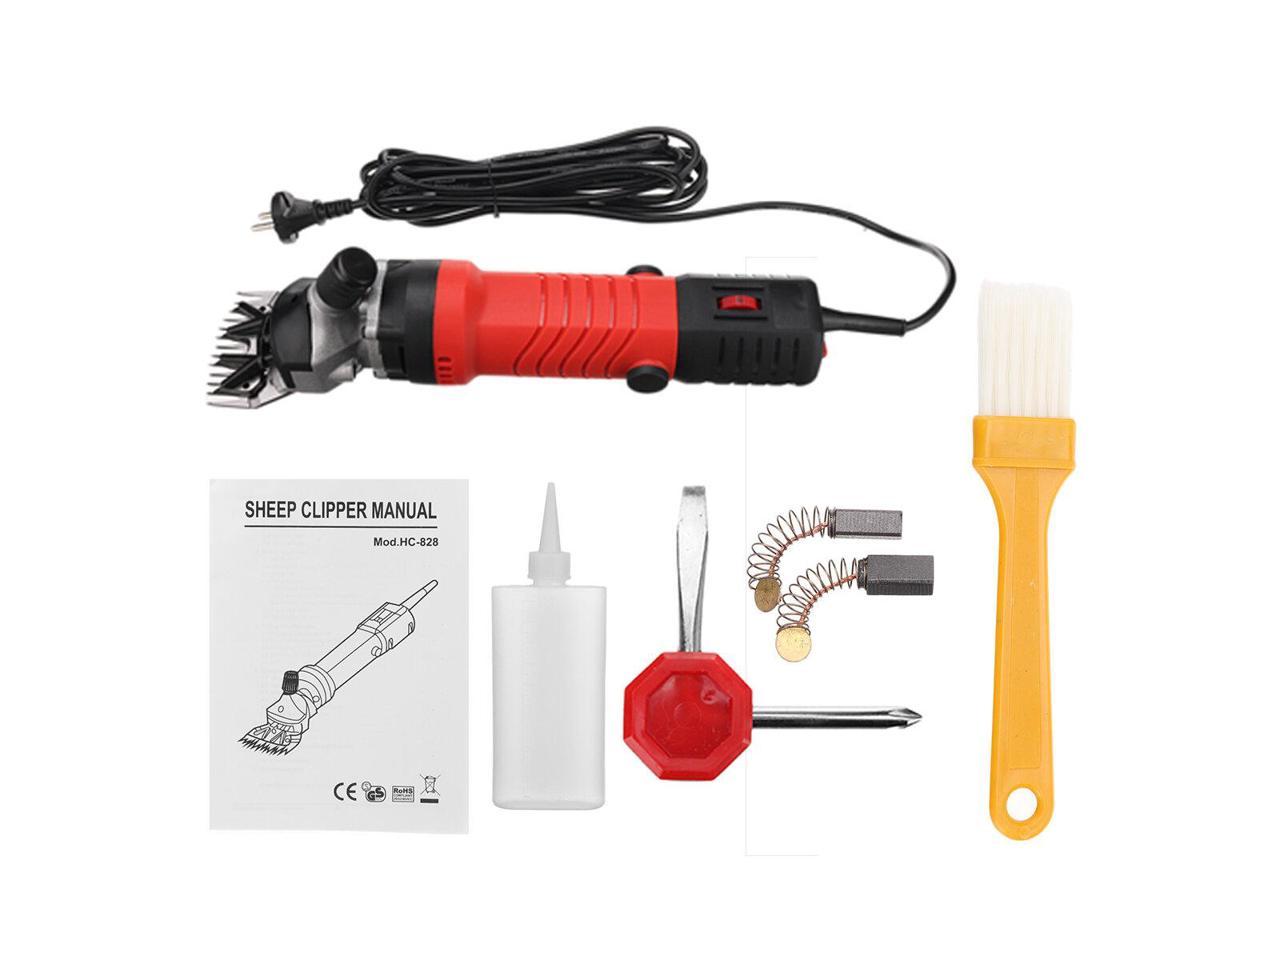 Portable Case 650W Electric Shearing Clippers Shears Sheep 2m Long Cable Set UK 